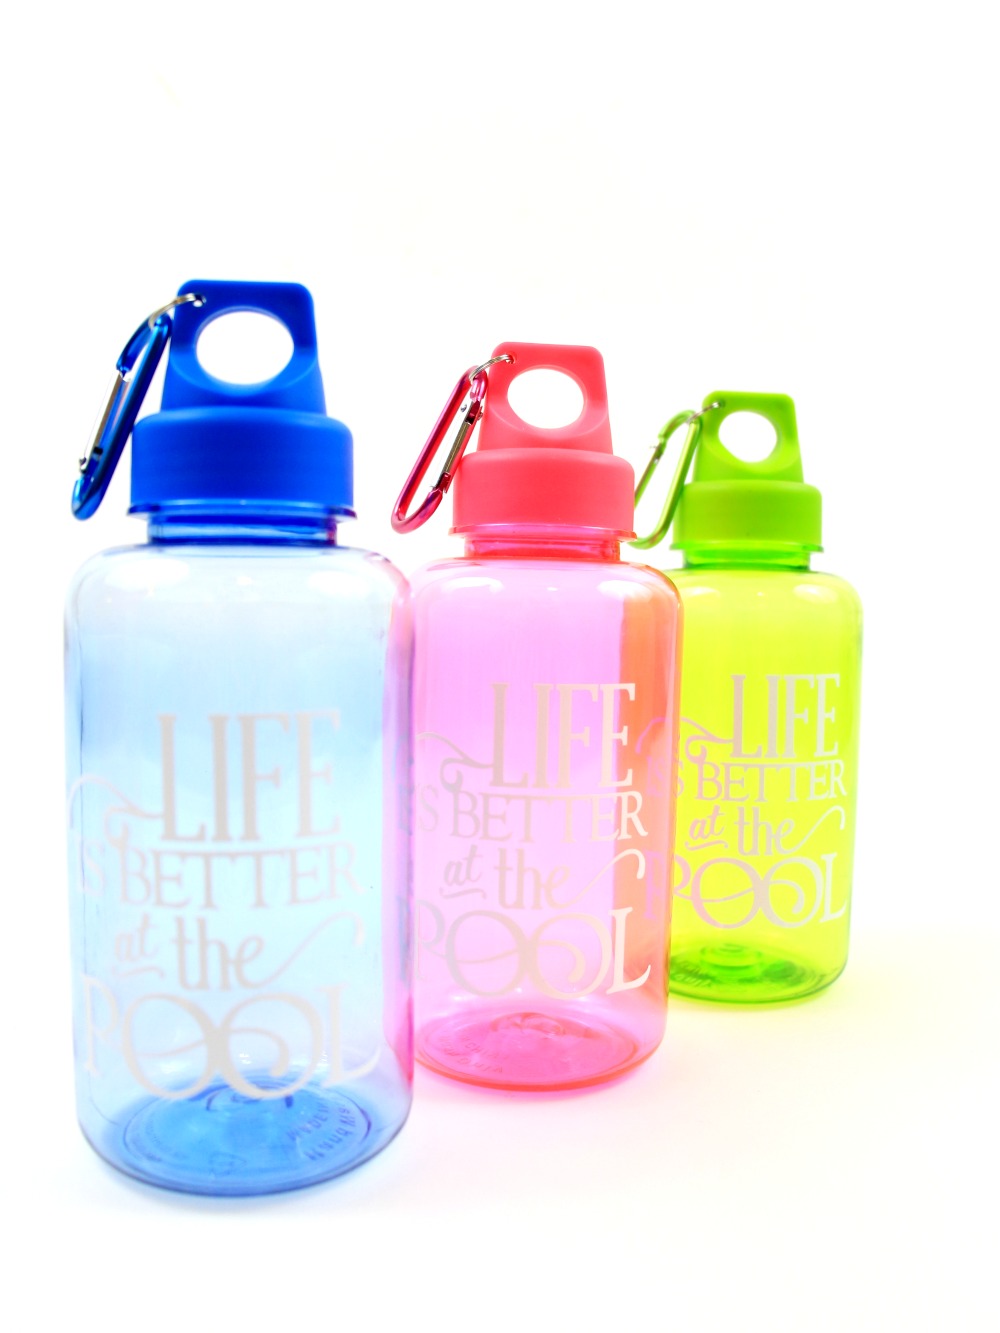 DIY water bottles with printable vinyl. An easy project to keep water bottles organized this summer.